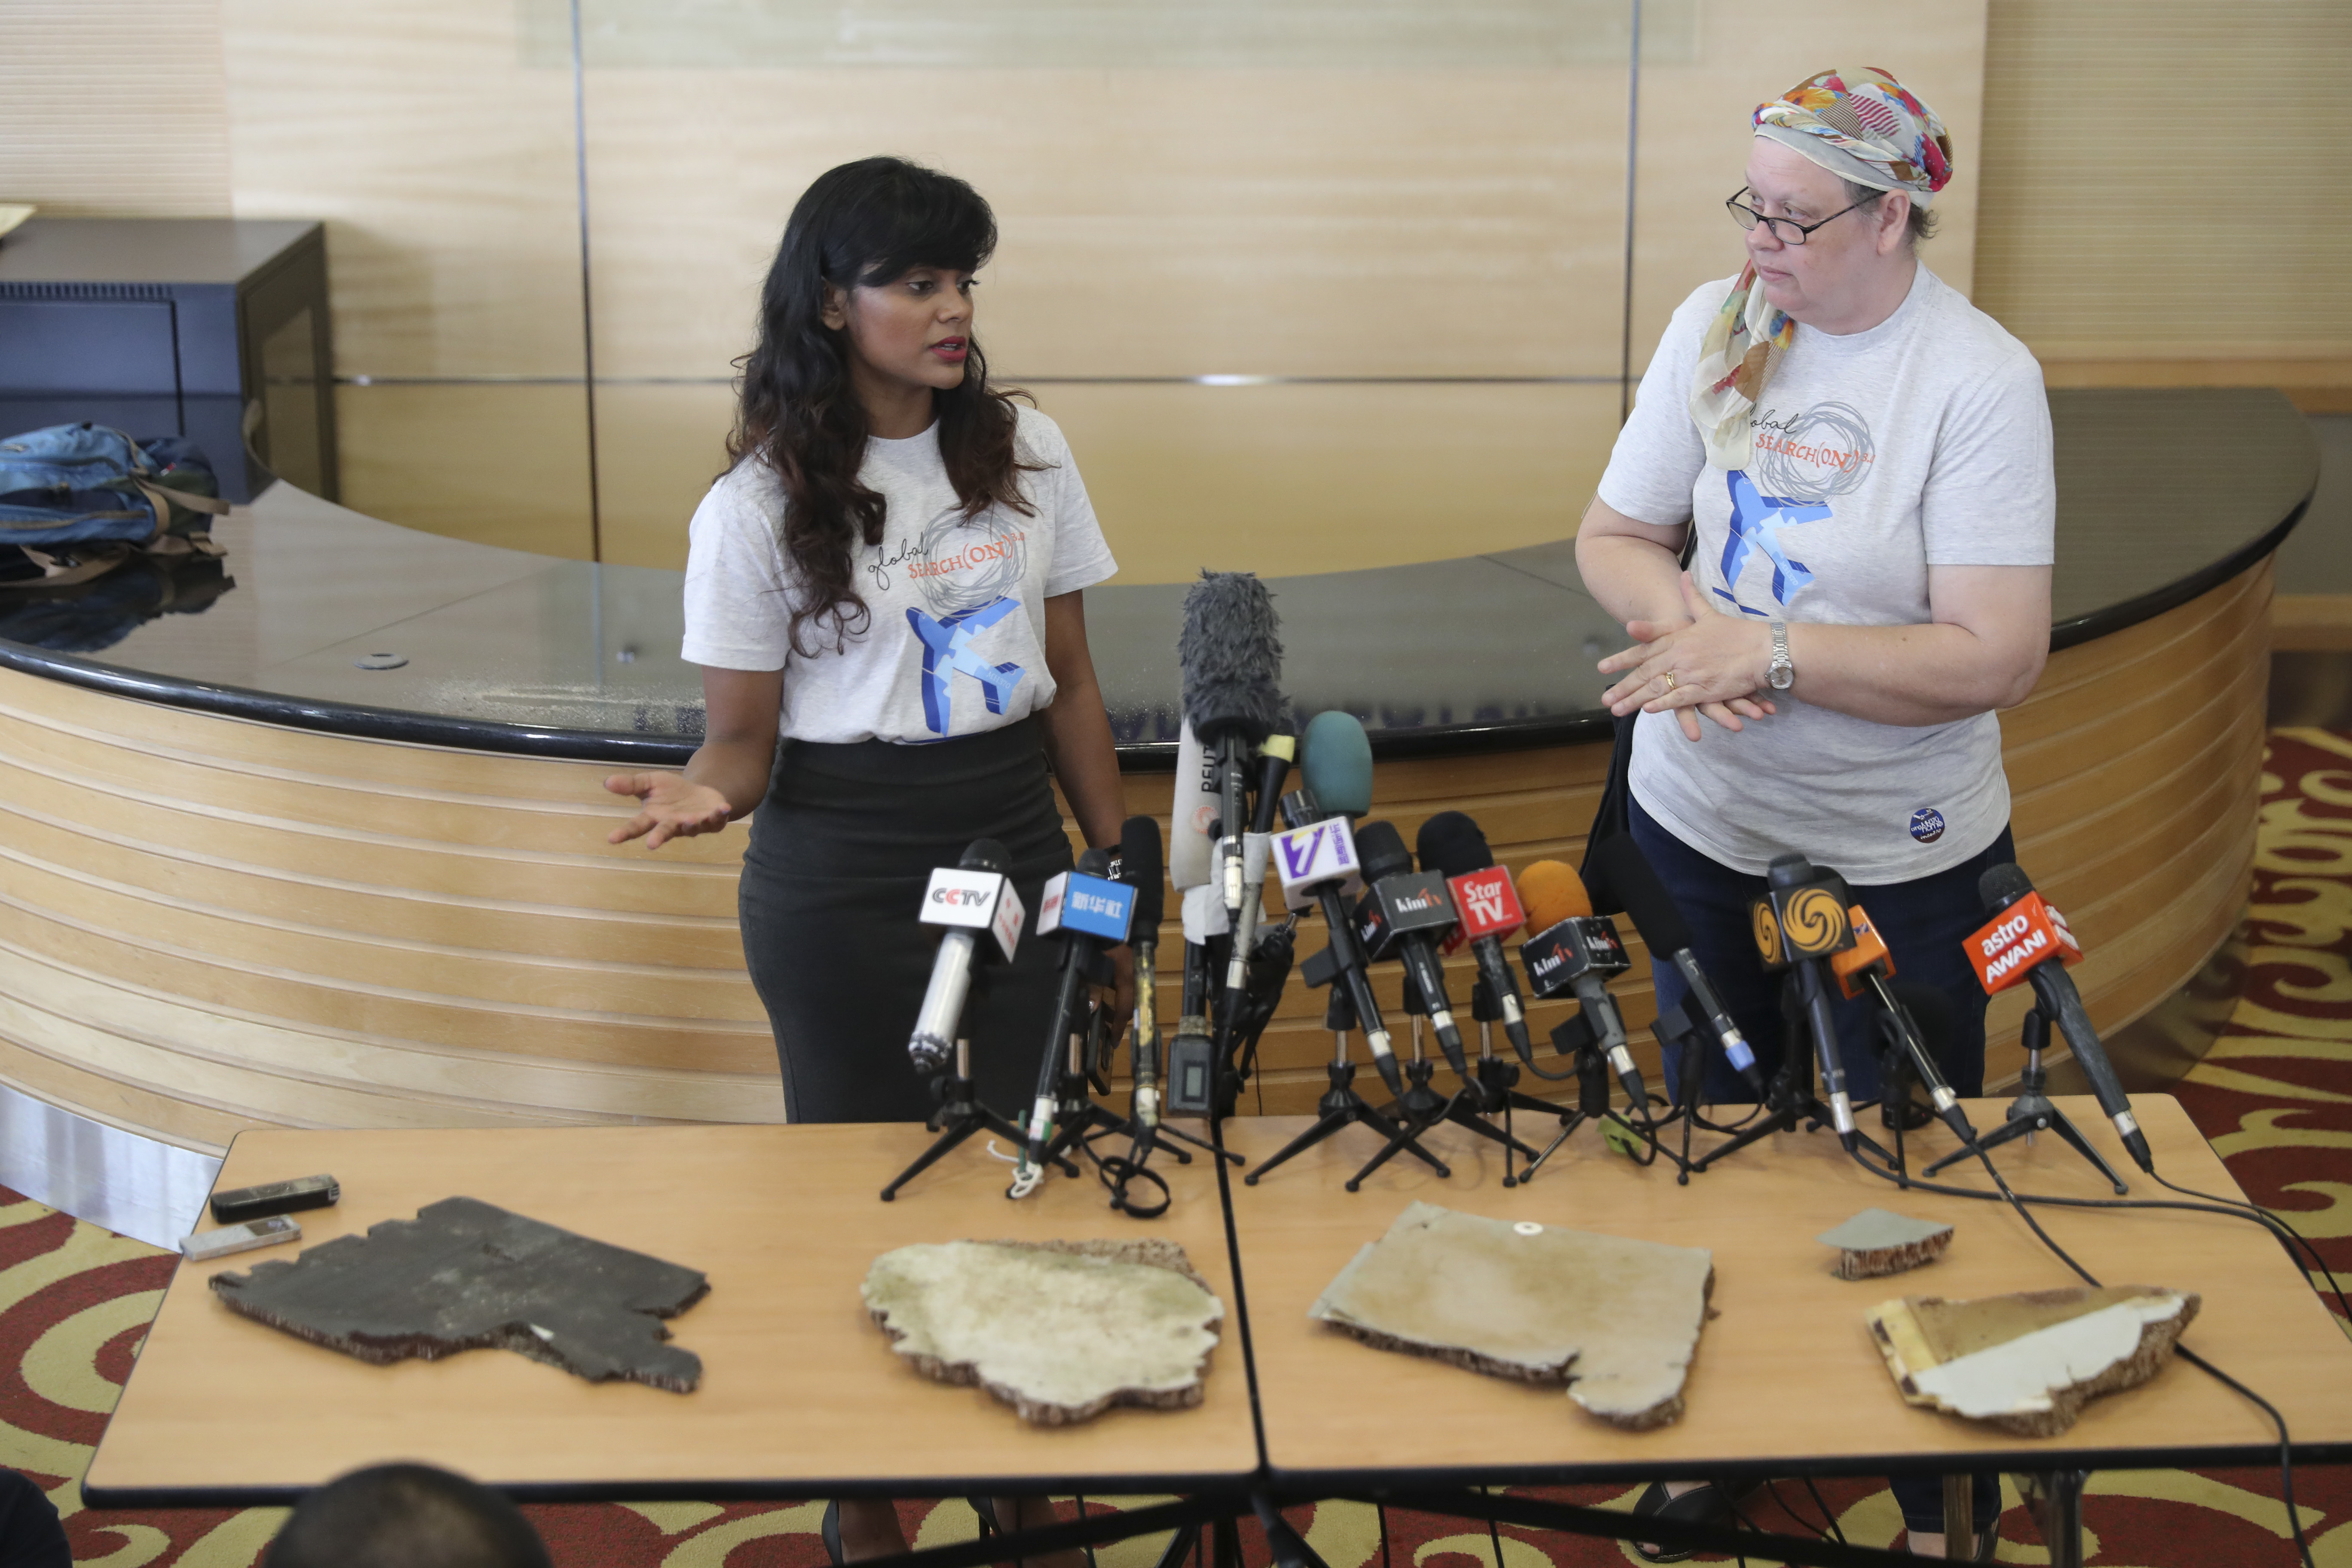 Grace Nathan, left, whose mother was on Malaysia Airlines Flight 370, and Jacquita Gomes, right, wife of Patrick Gomes, the in-flight supervisor on the ill-fated plane, show pieces of debris believed to be from the missing plane at the Ministry of Transport in Putrajaya